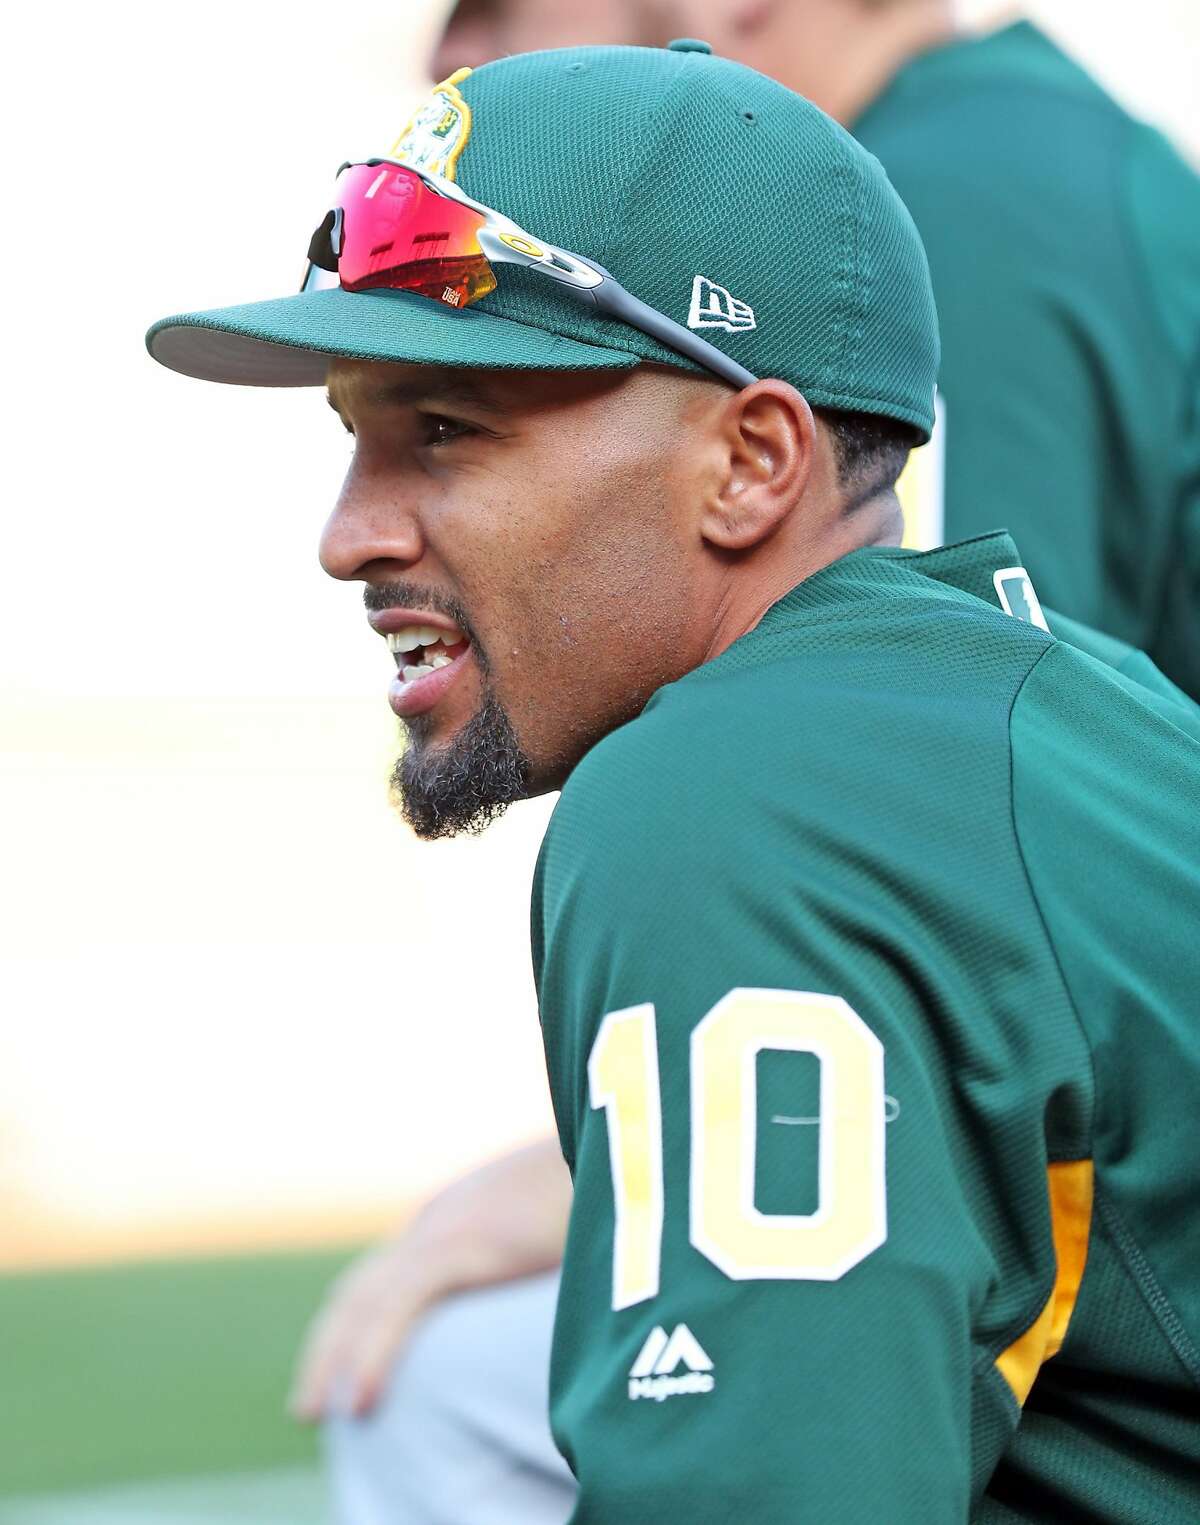 Oakland Athletics' Marcus Semien before playing San Francisco Giants during Bay Bridge Series at AT&T Park in San Francisco, Calif., on Thursday, March 30, 2017.